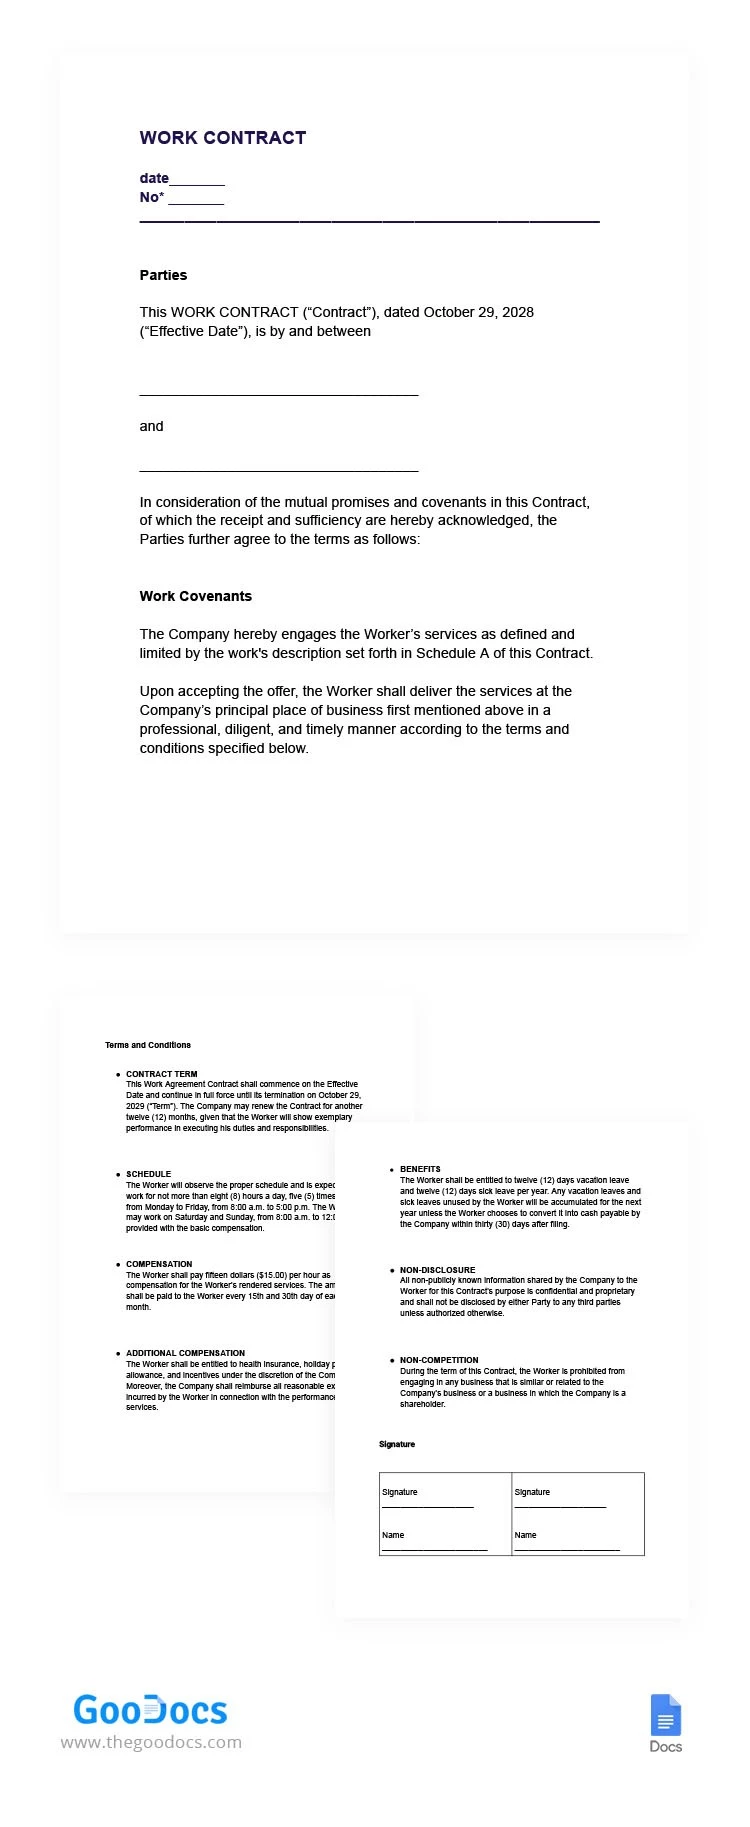 Work Contract - free Google Docs Template - 10065730